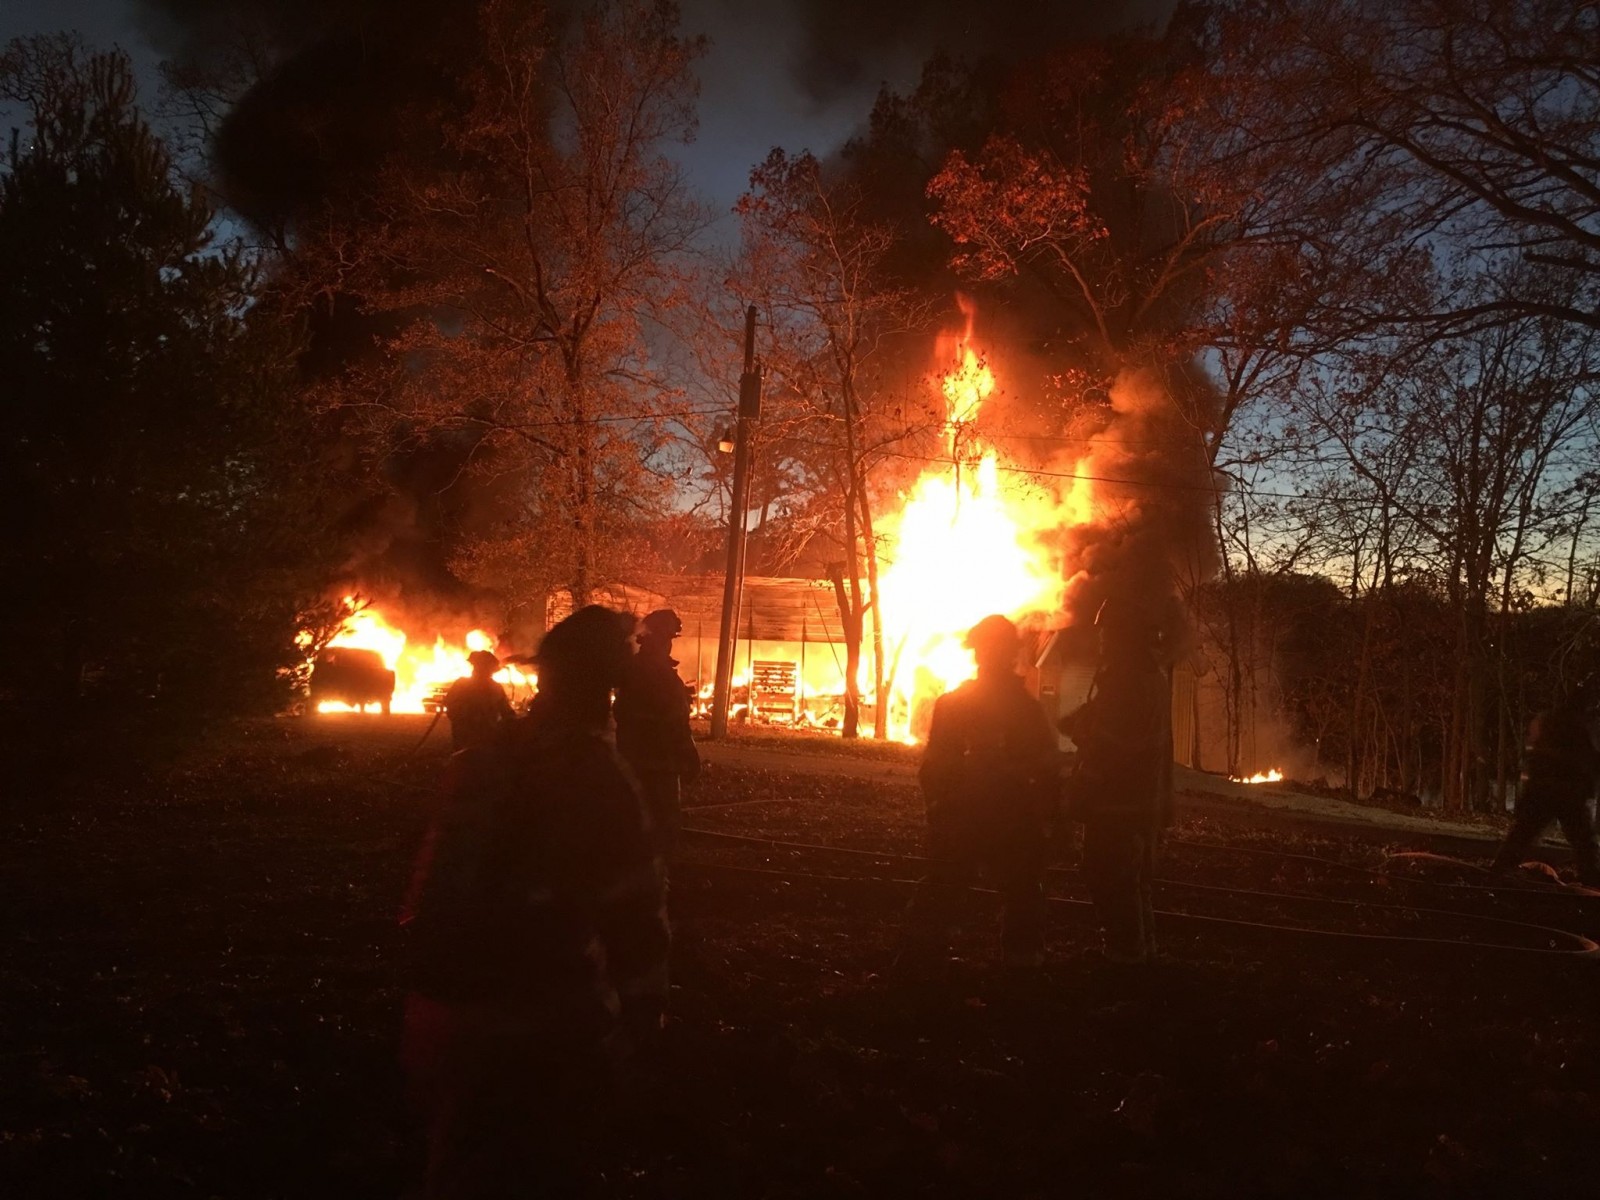 Firefighters attempt to contain the blaze at a Pana Lake residence on Sunday. Photo Courtesy of a Pana Police Department Press Release.